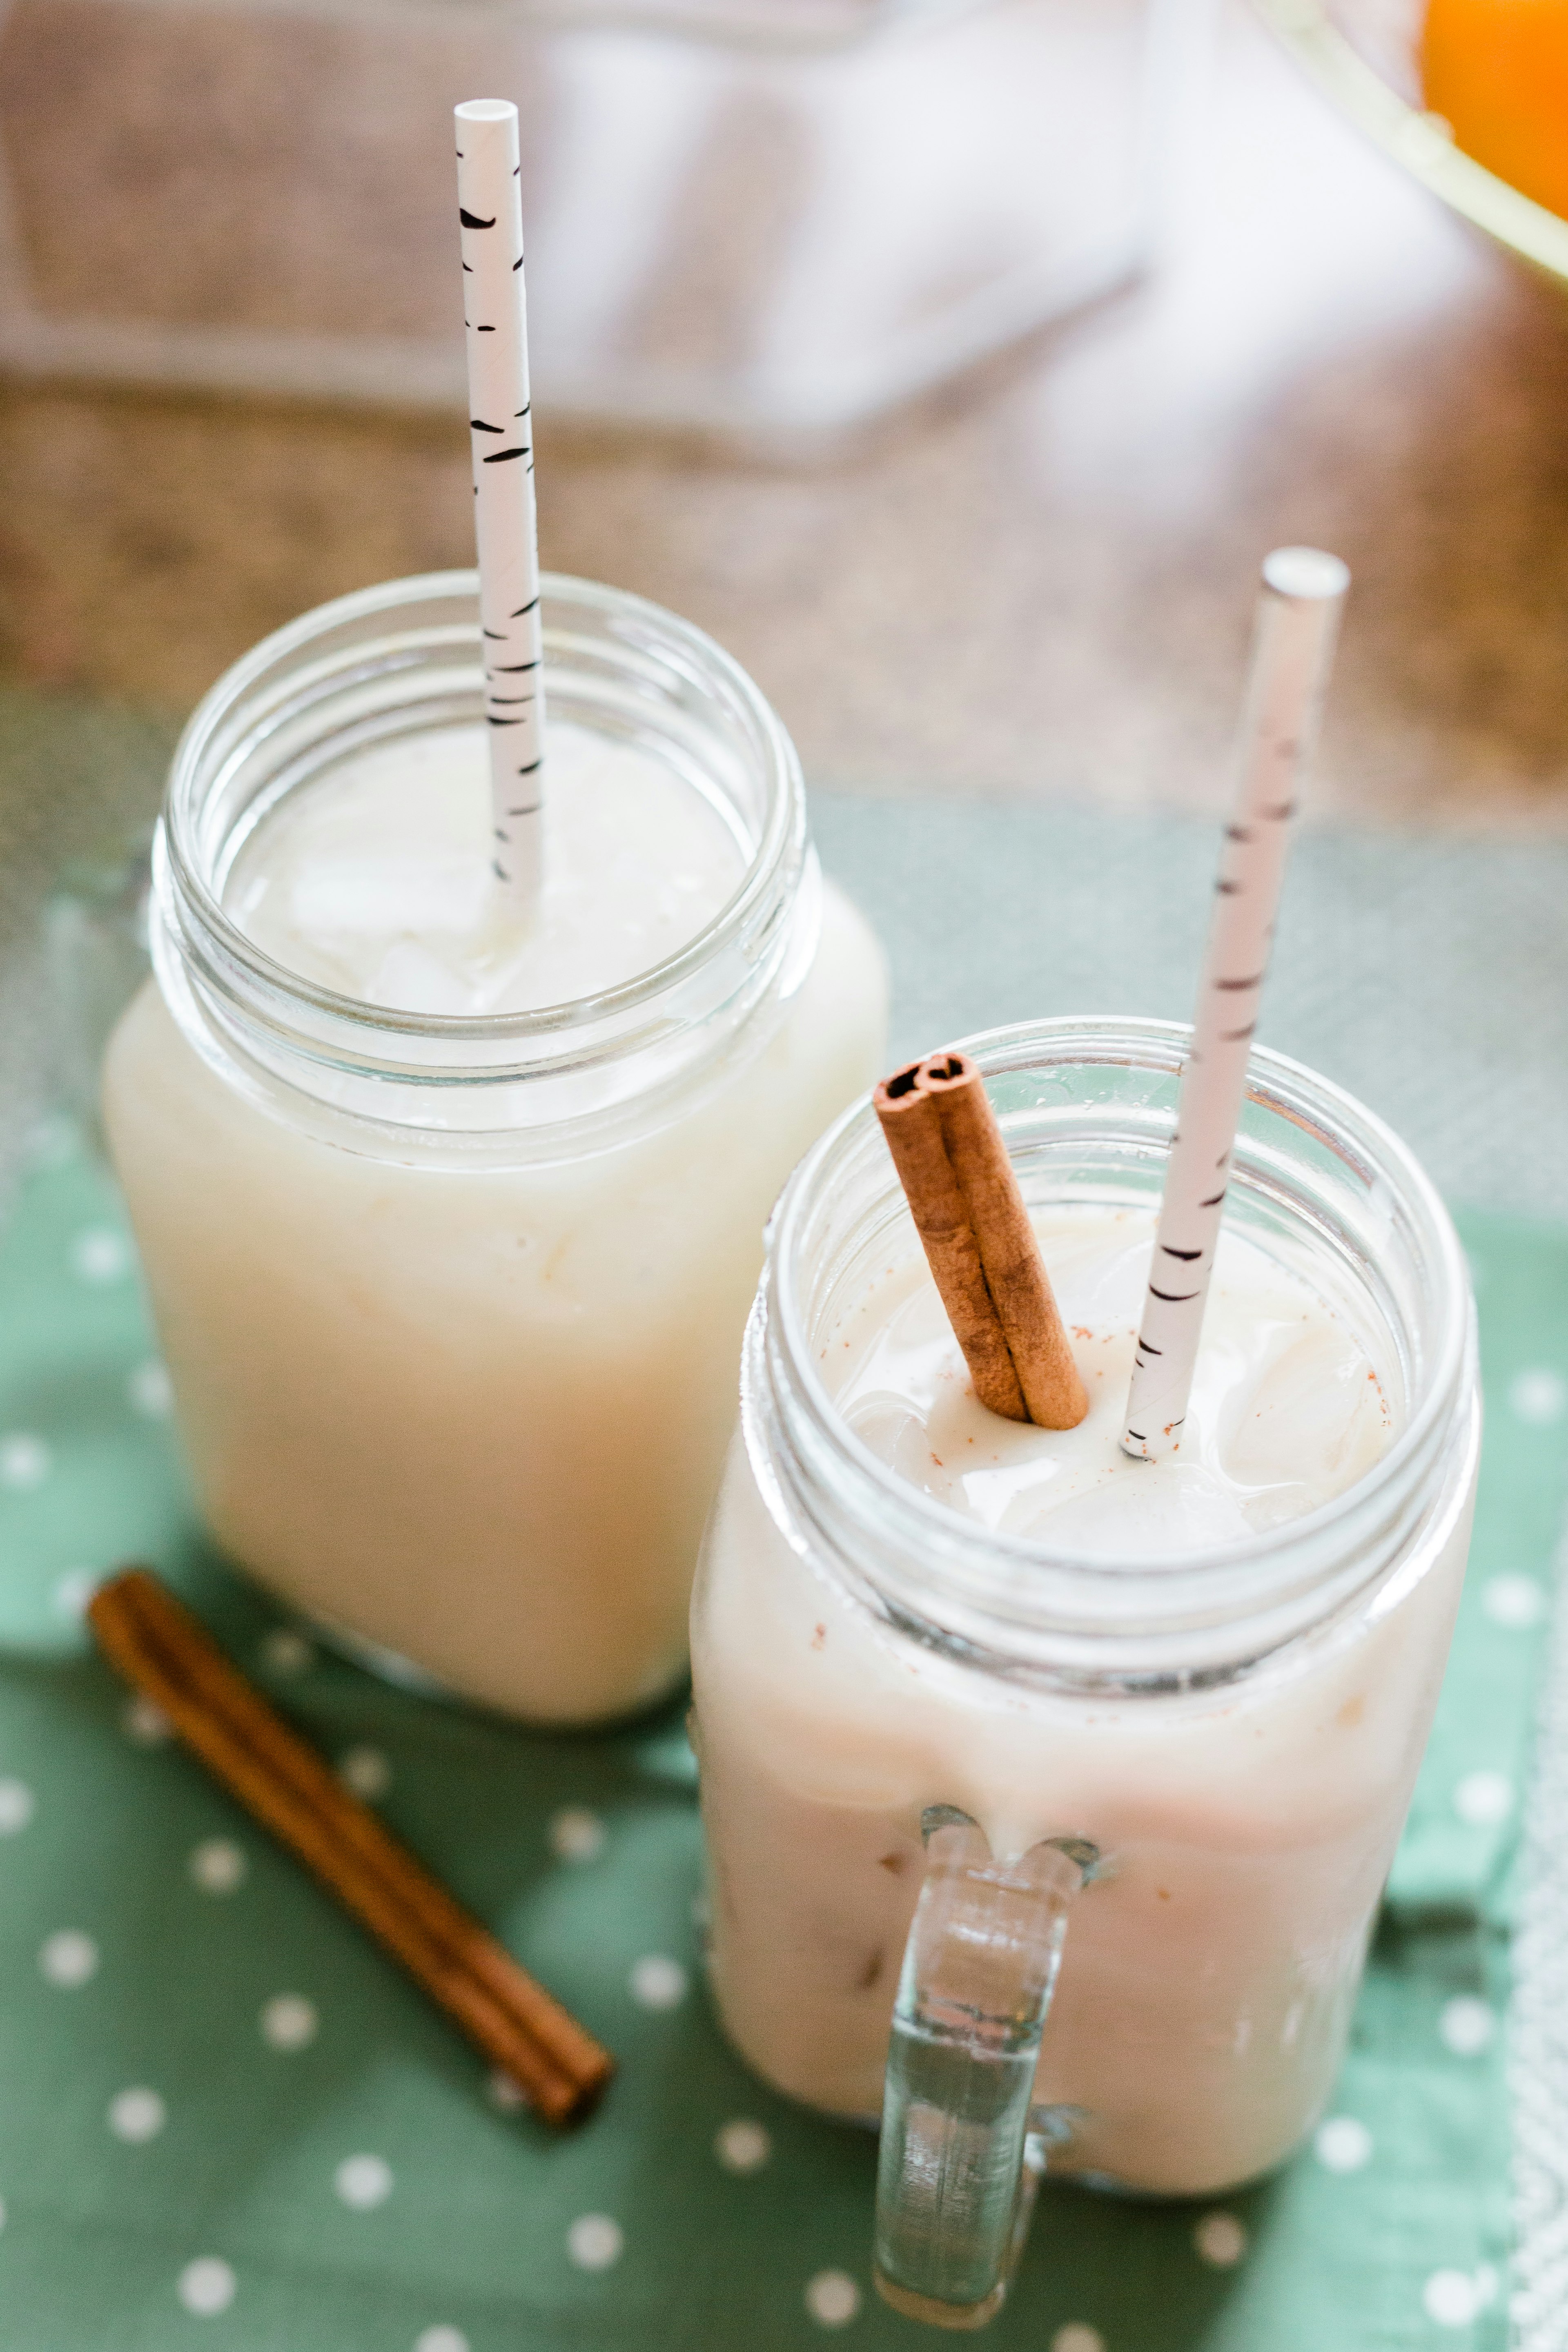 Refreshing Agua de horchata Drink in two glass mugs with a cinnamon stick and a straw on a green napkin